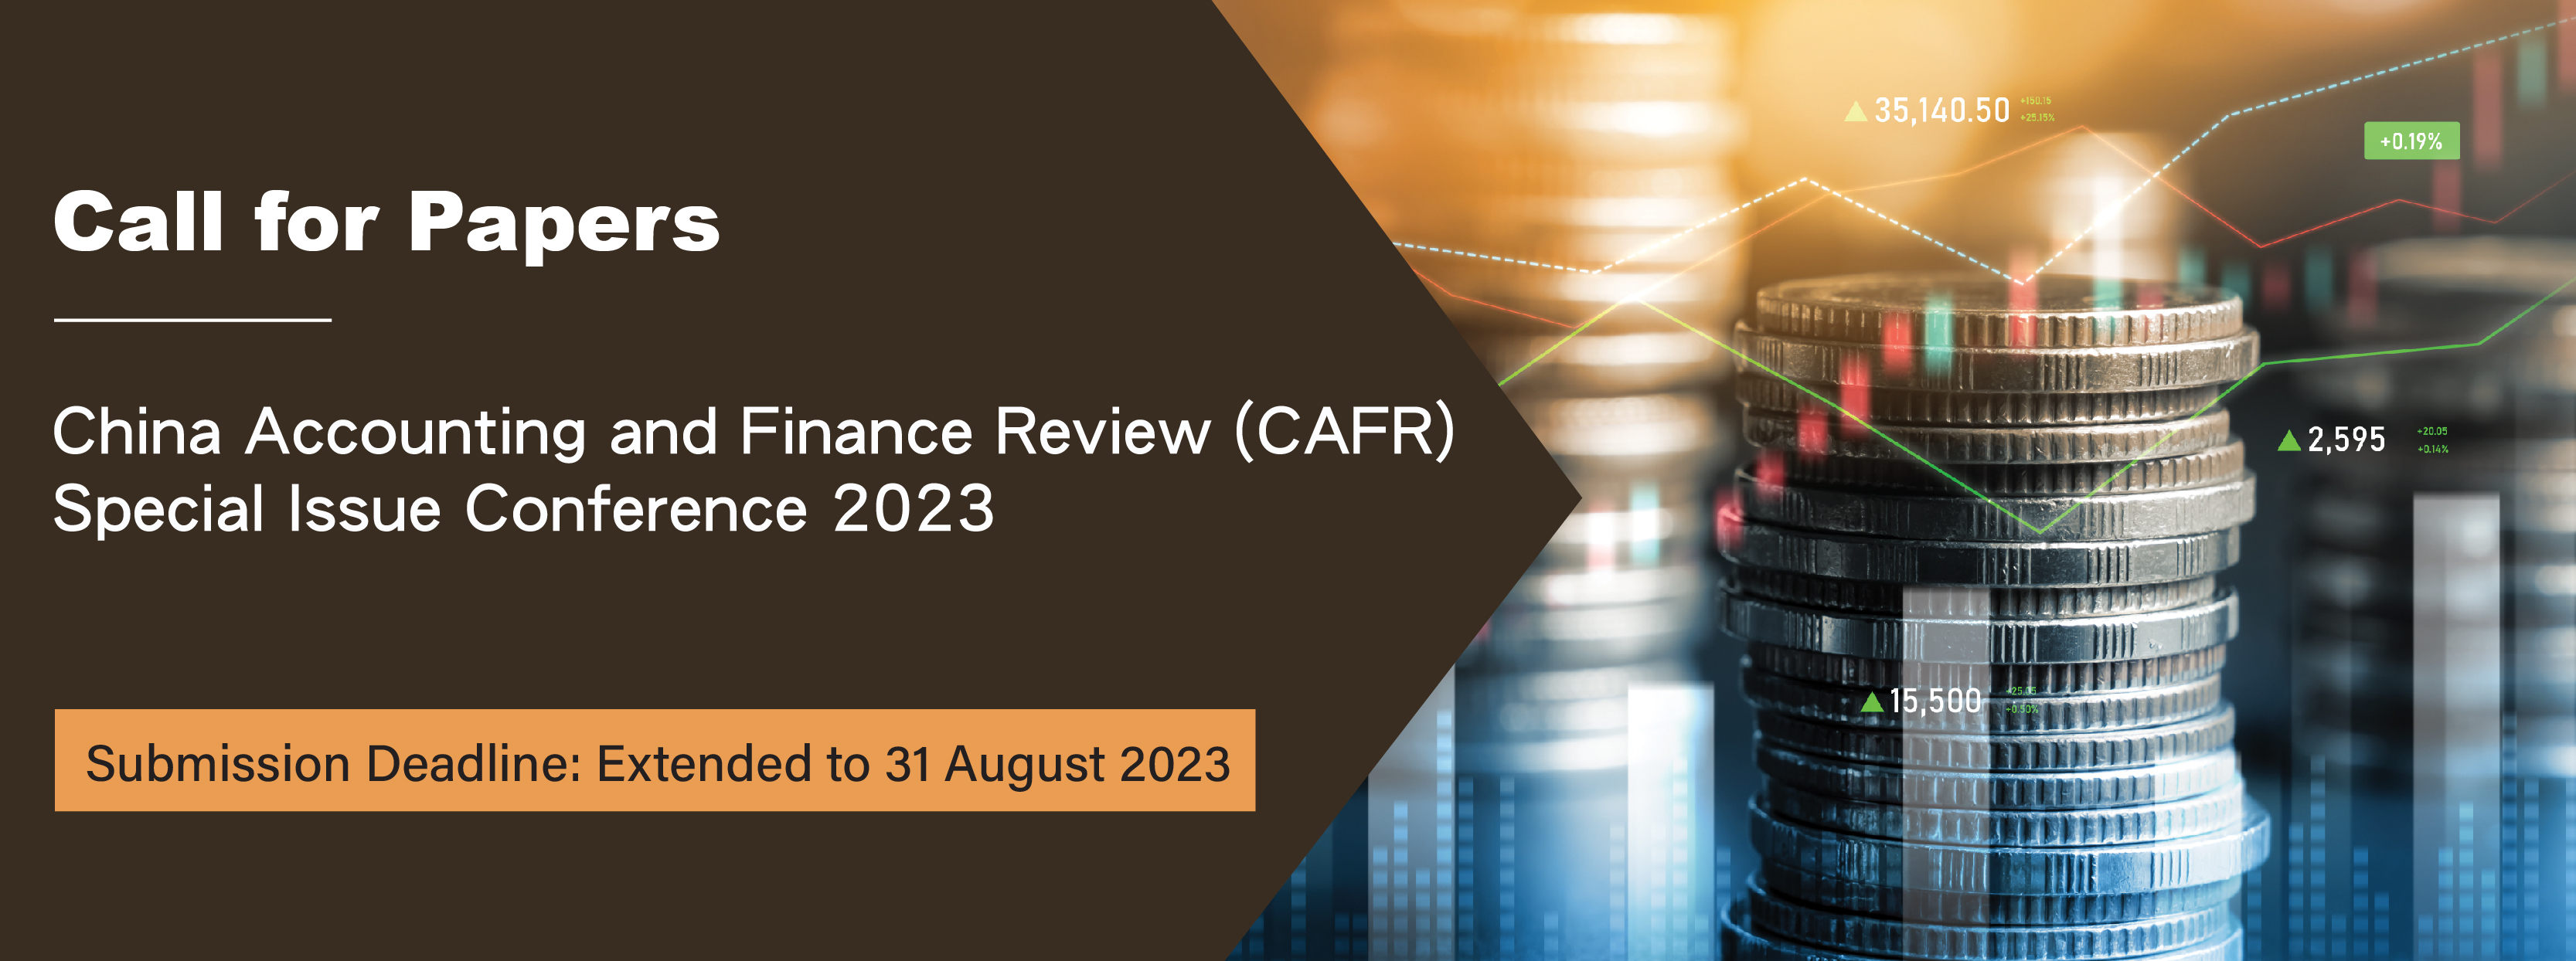 CAFR Special Issue Conference 2023 v.3